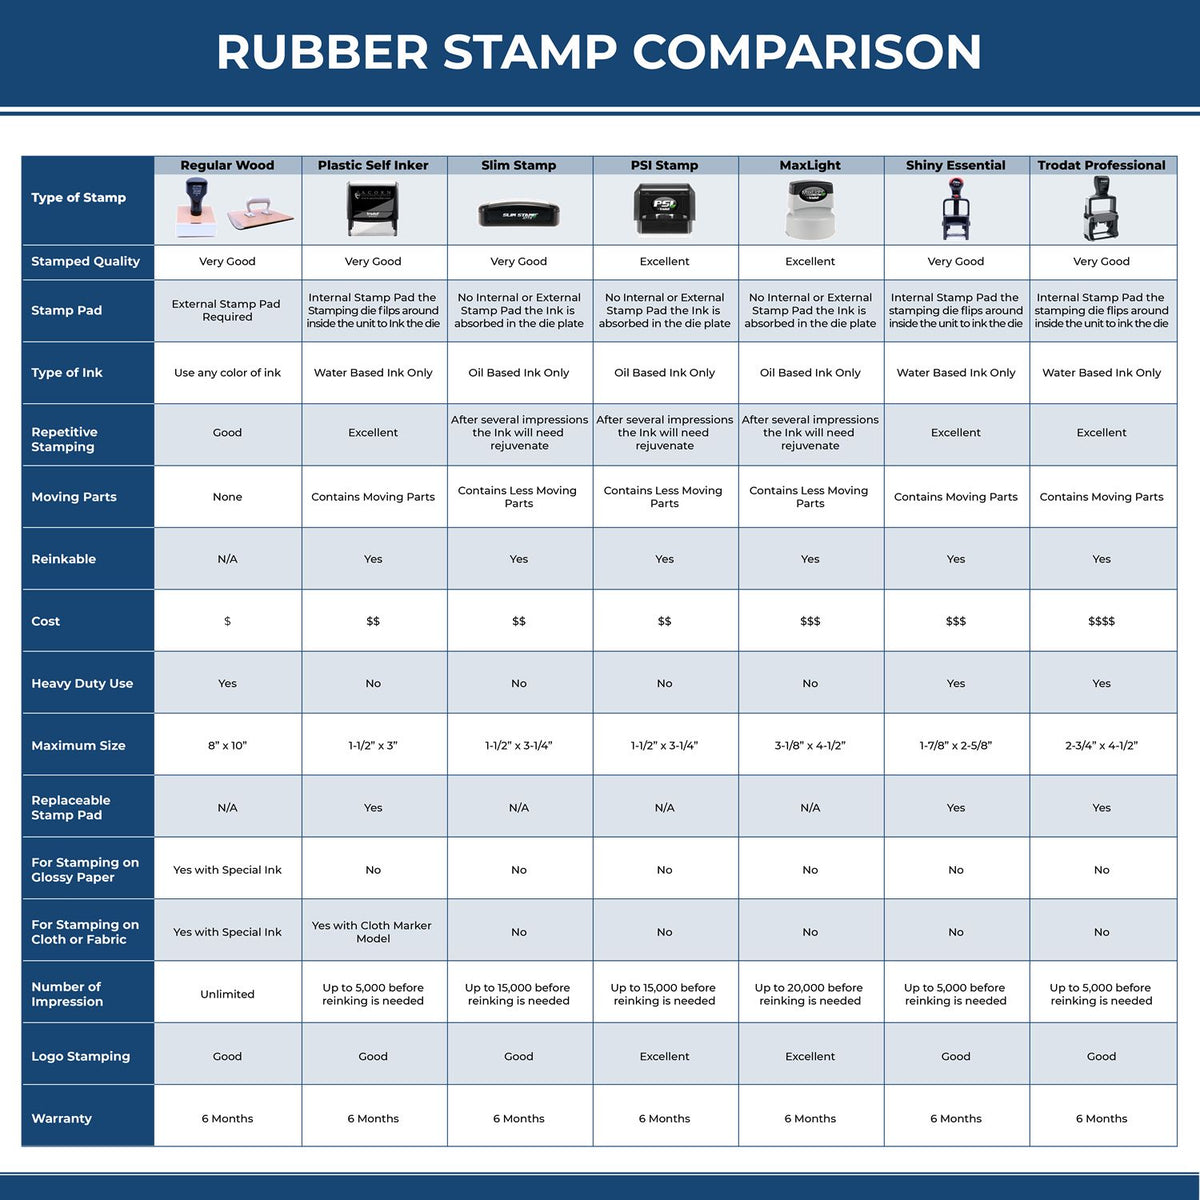 Large Self Inking 100 Stamp 4698S Rubber Stamp Comparison